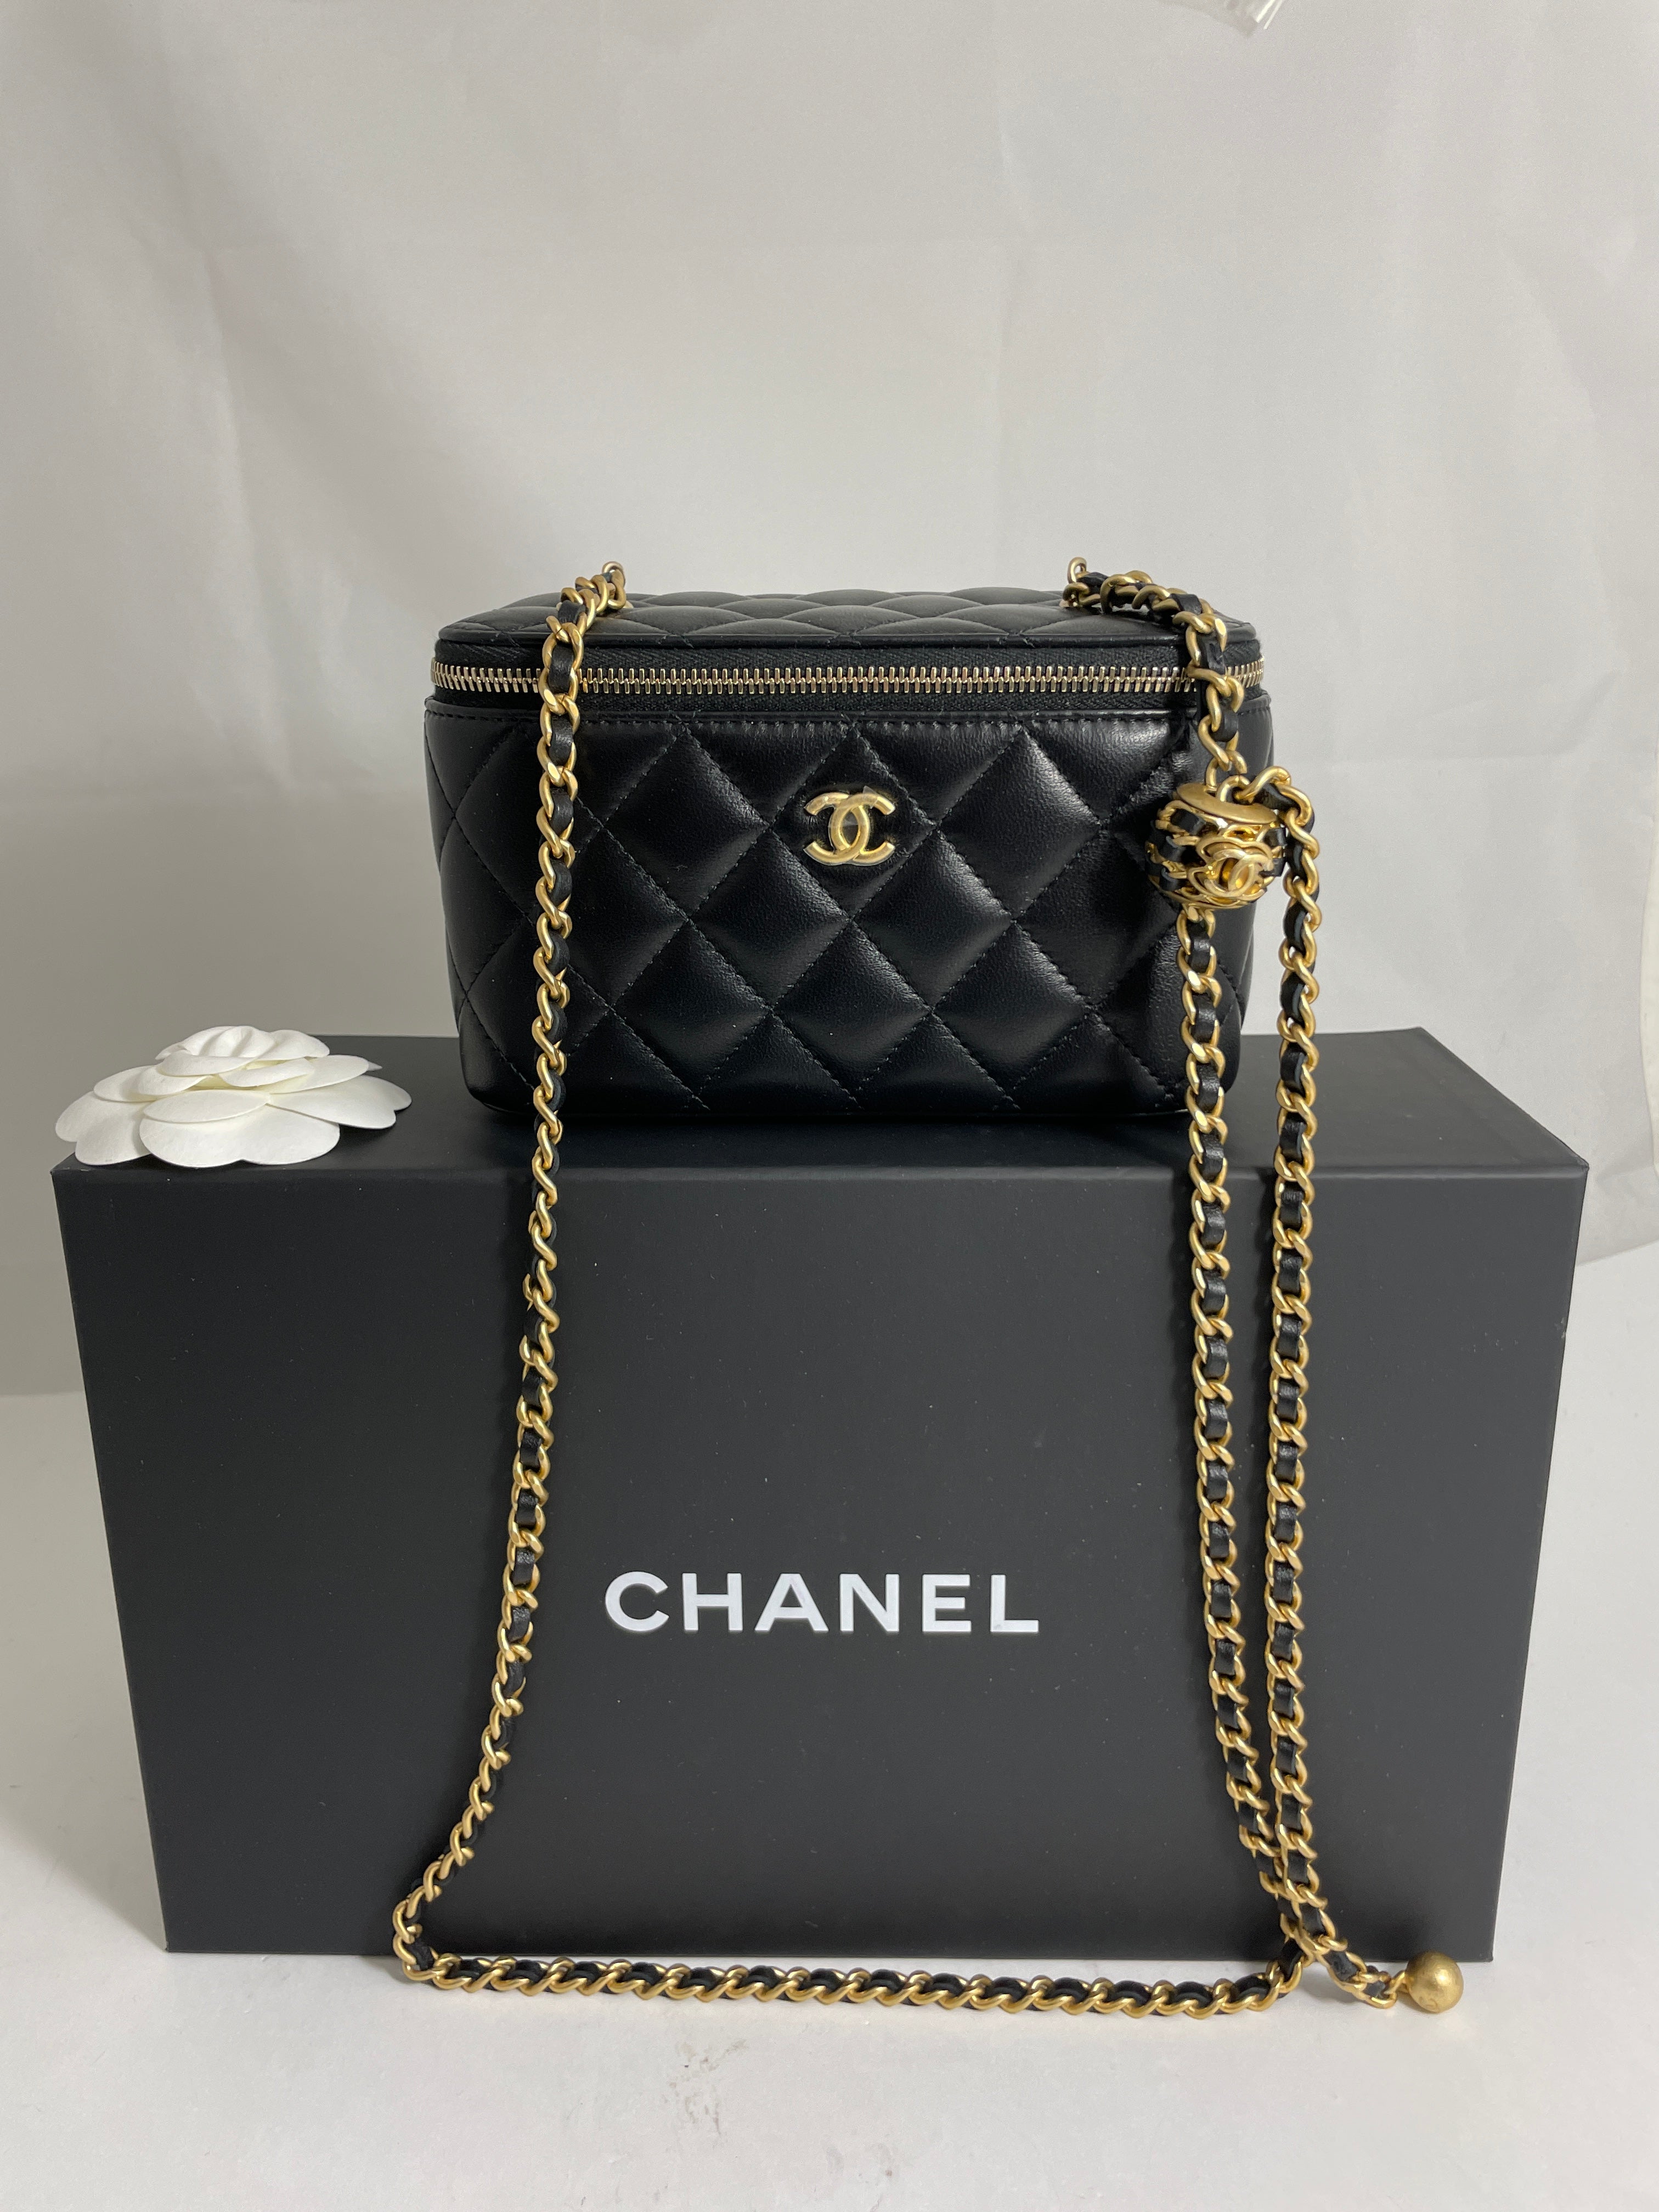 Chanel Vanity Bag Black Gold Bicolore A01619 Leather Lambskin No. 3 CHANEL  Handbag Cocomark Quilted Pouch Cosmetics